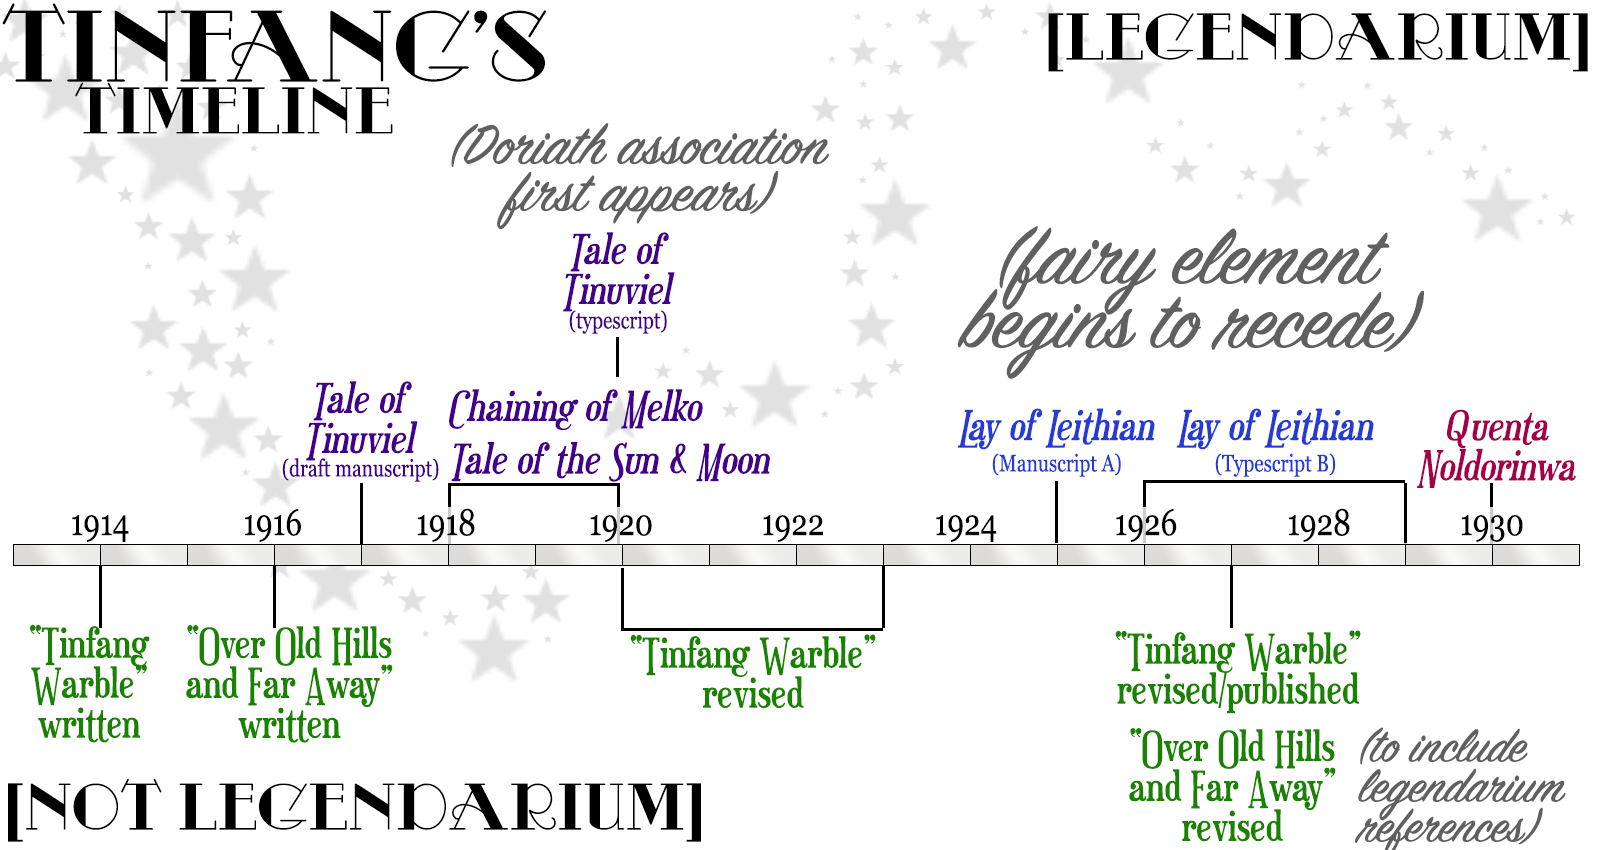 Tinfang's Timeline, Legendarium, 1917 Tale of Tinuviel (draft manuscript), 1918-1920 Chaining of Melko, Tale of the Sun and Moon, 1920 Tale of Tinuviel (typescript), Doriath association first appears, 1925 Lay of Leithian (Manuscript A), fairy element begins to recede, 1926-1929 Lay of Leithian (Typescript B), 1930 Quenta Noldorinwa, Not Legendarium, 1914 Tinfang Warble written, 1916 Over Old Hills and Far Away written,  1927 Tinfang Warble revised and published, Over Old Hills and Far Away revised, to include legendarium references